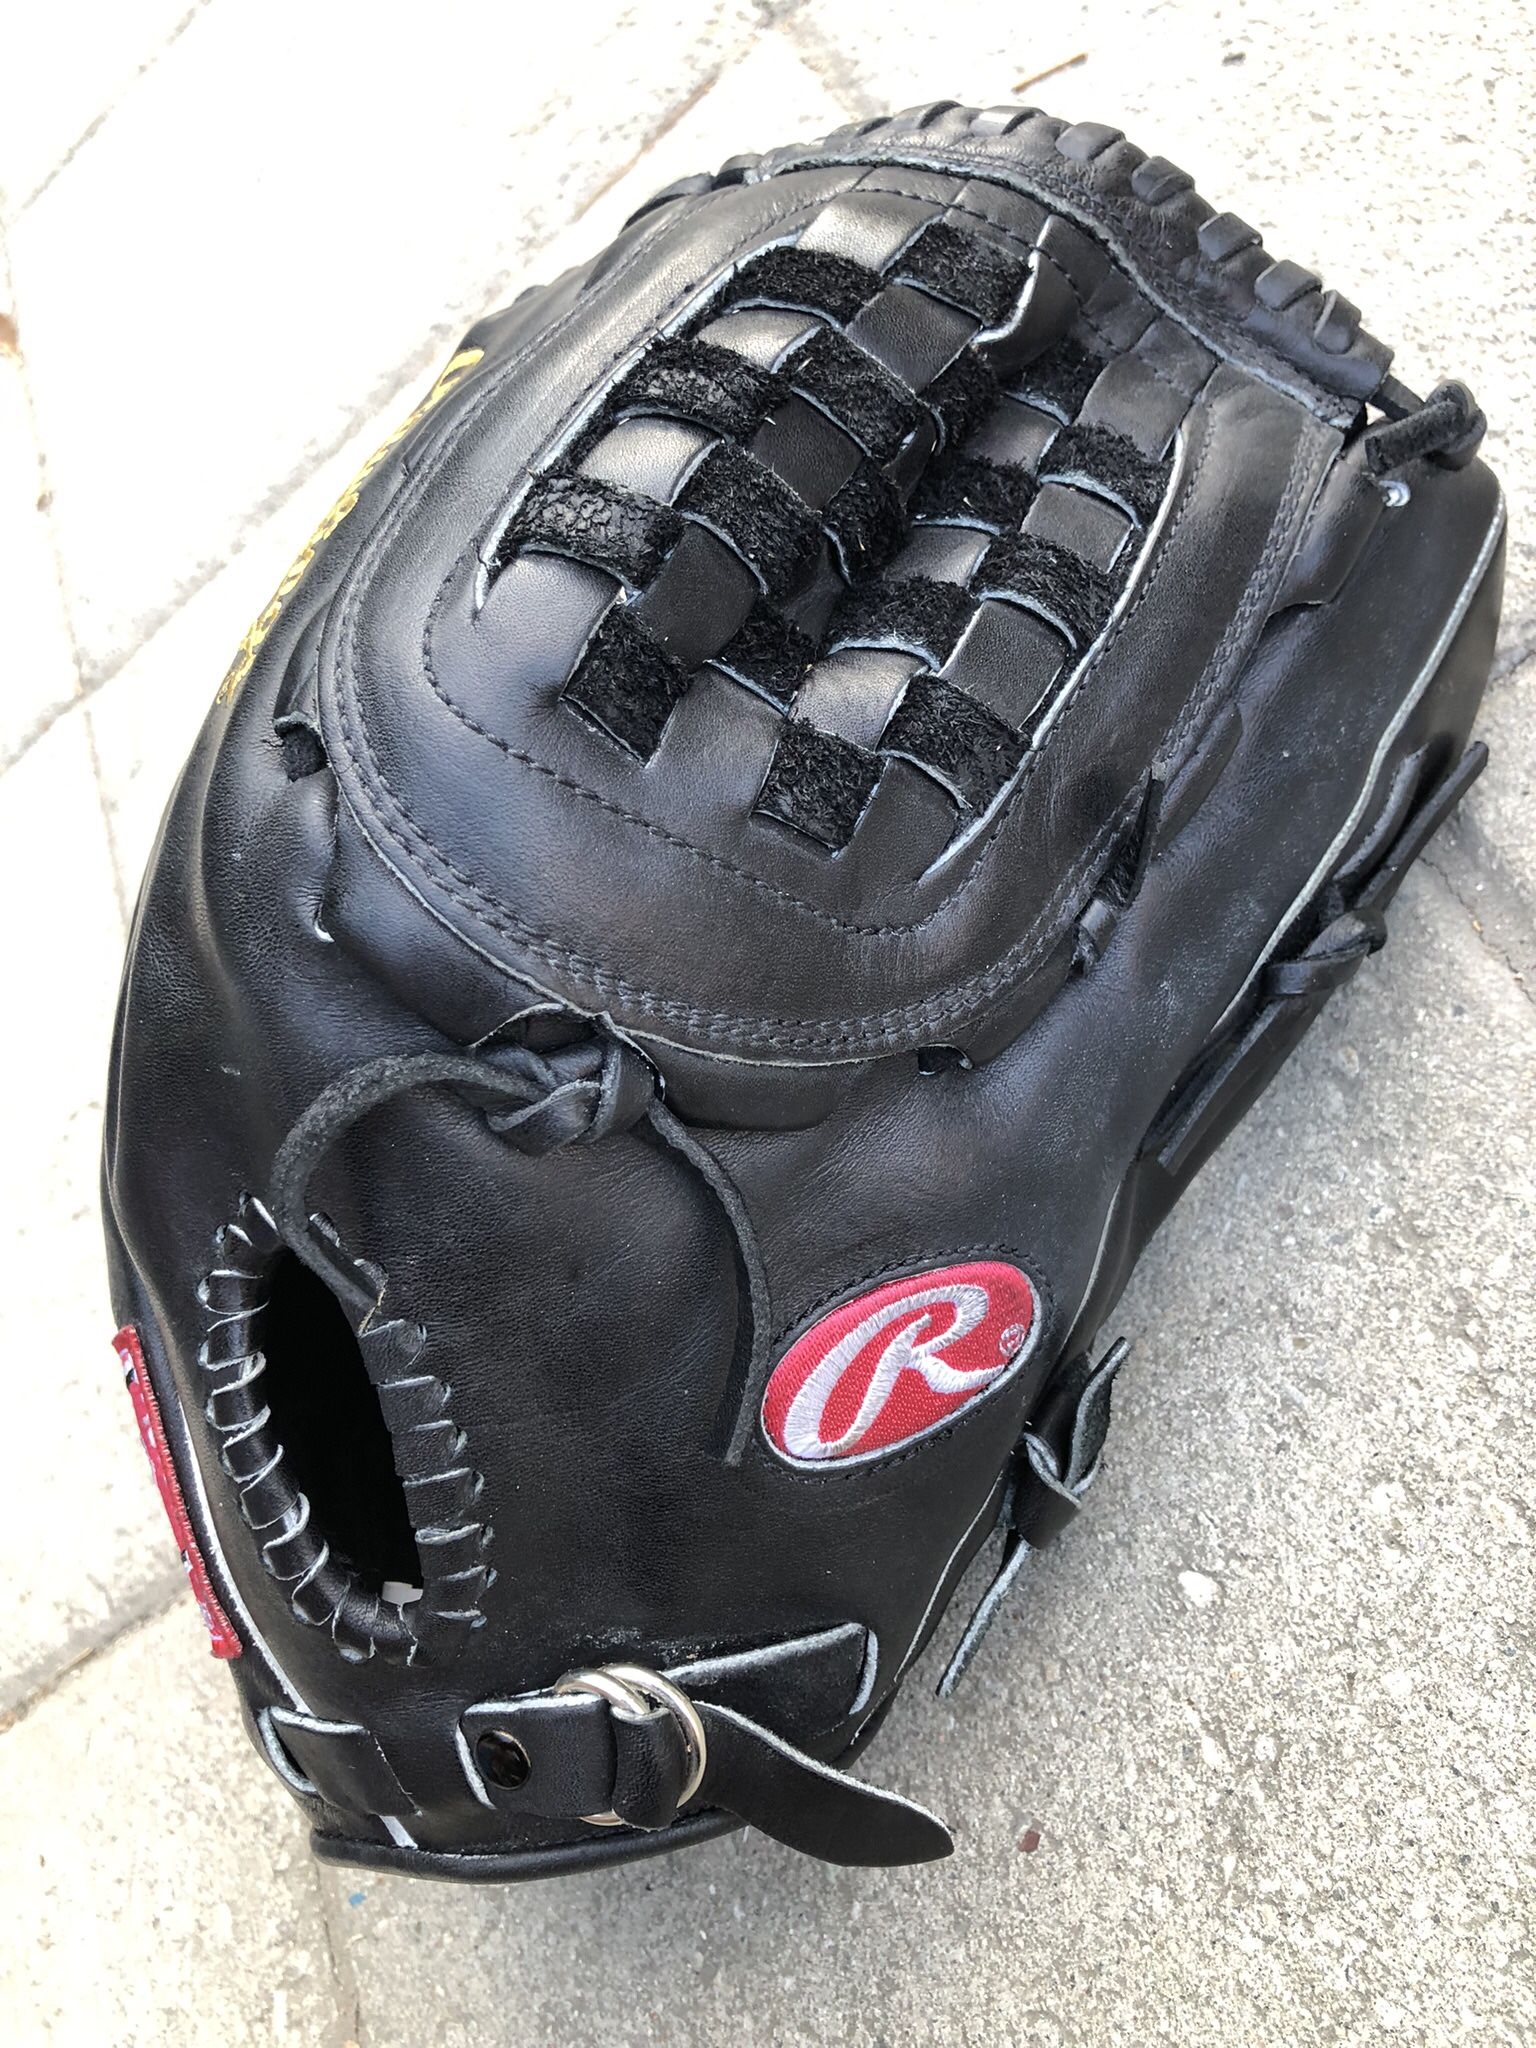 Rawlings Baseball Glove Heart Of The Hide Gold Glove Sz 12 1/2” In Excellent Condition Have More Equipment 